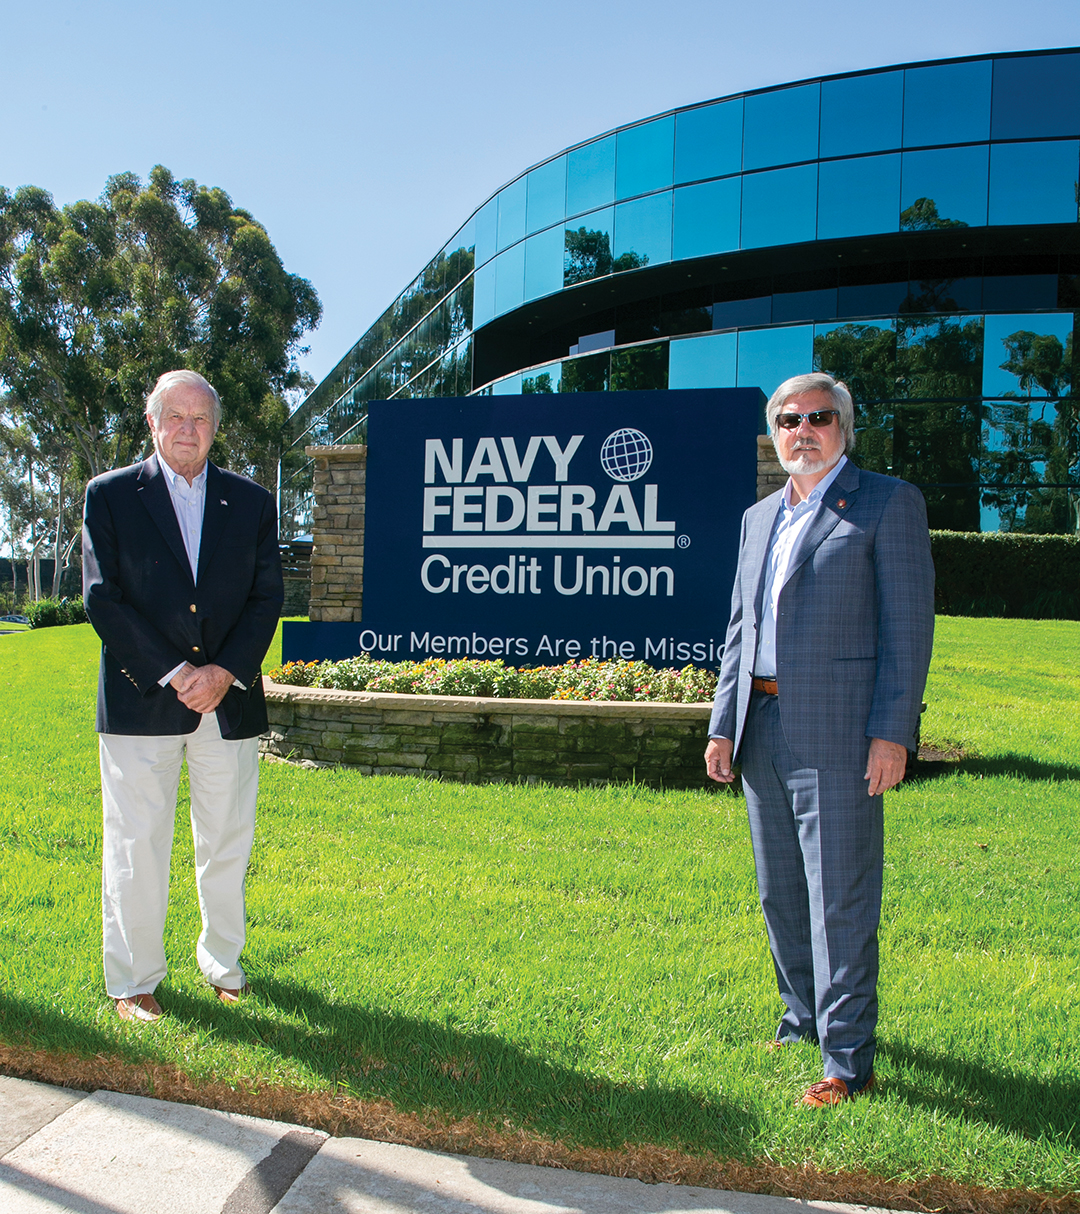 Pete Hedley and Mark Rodriguez outside of a Navy Federal Credit Union